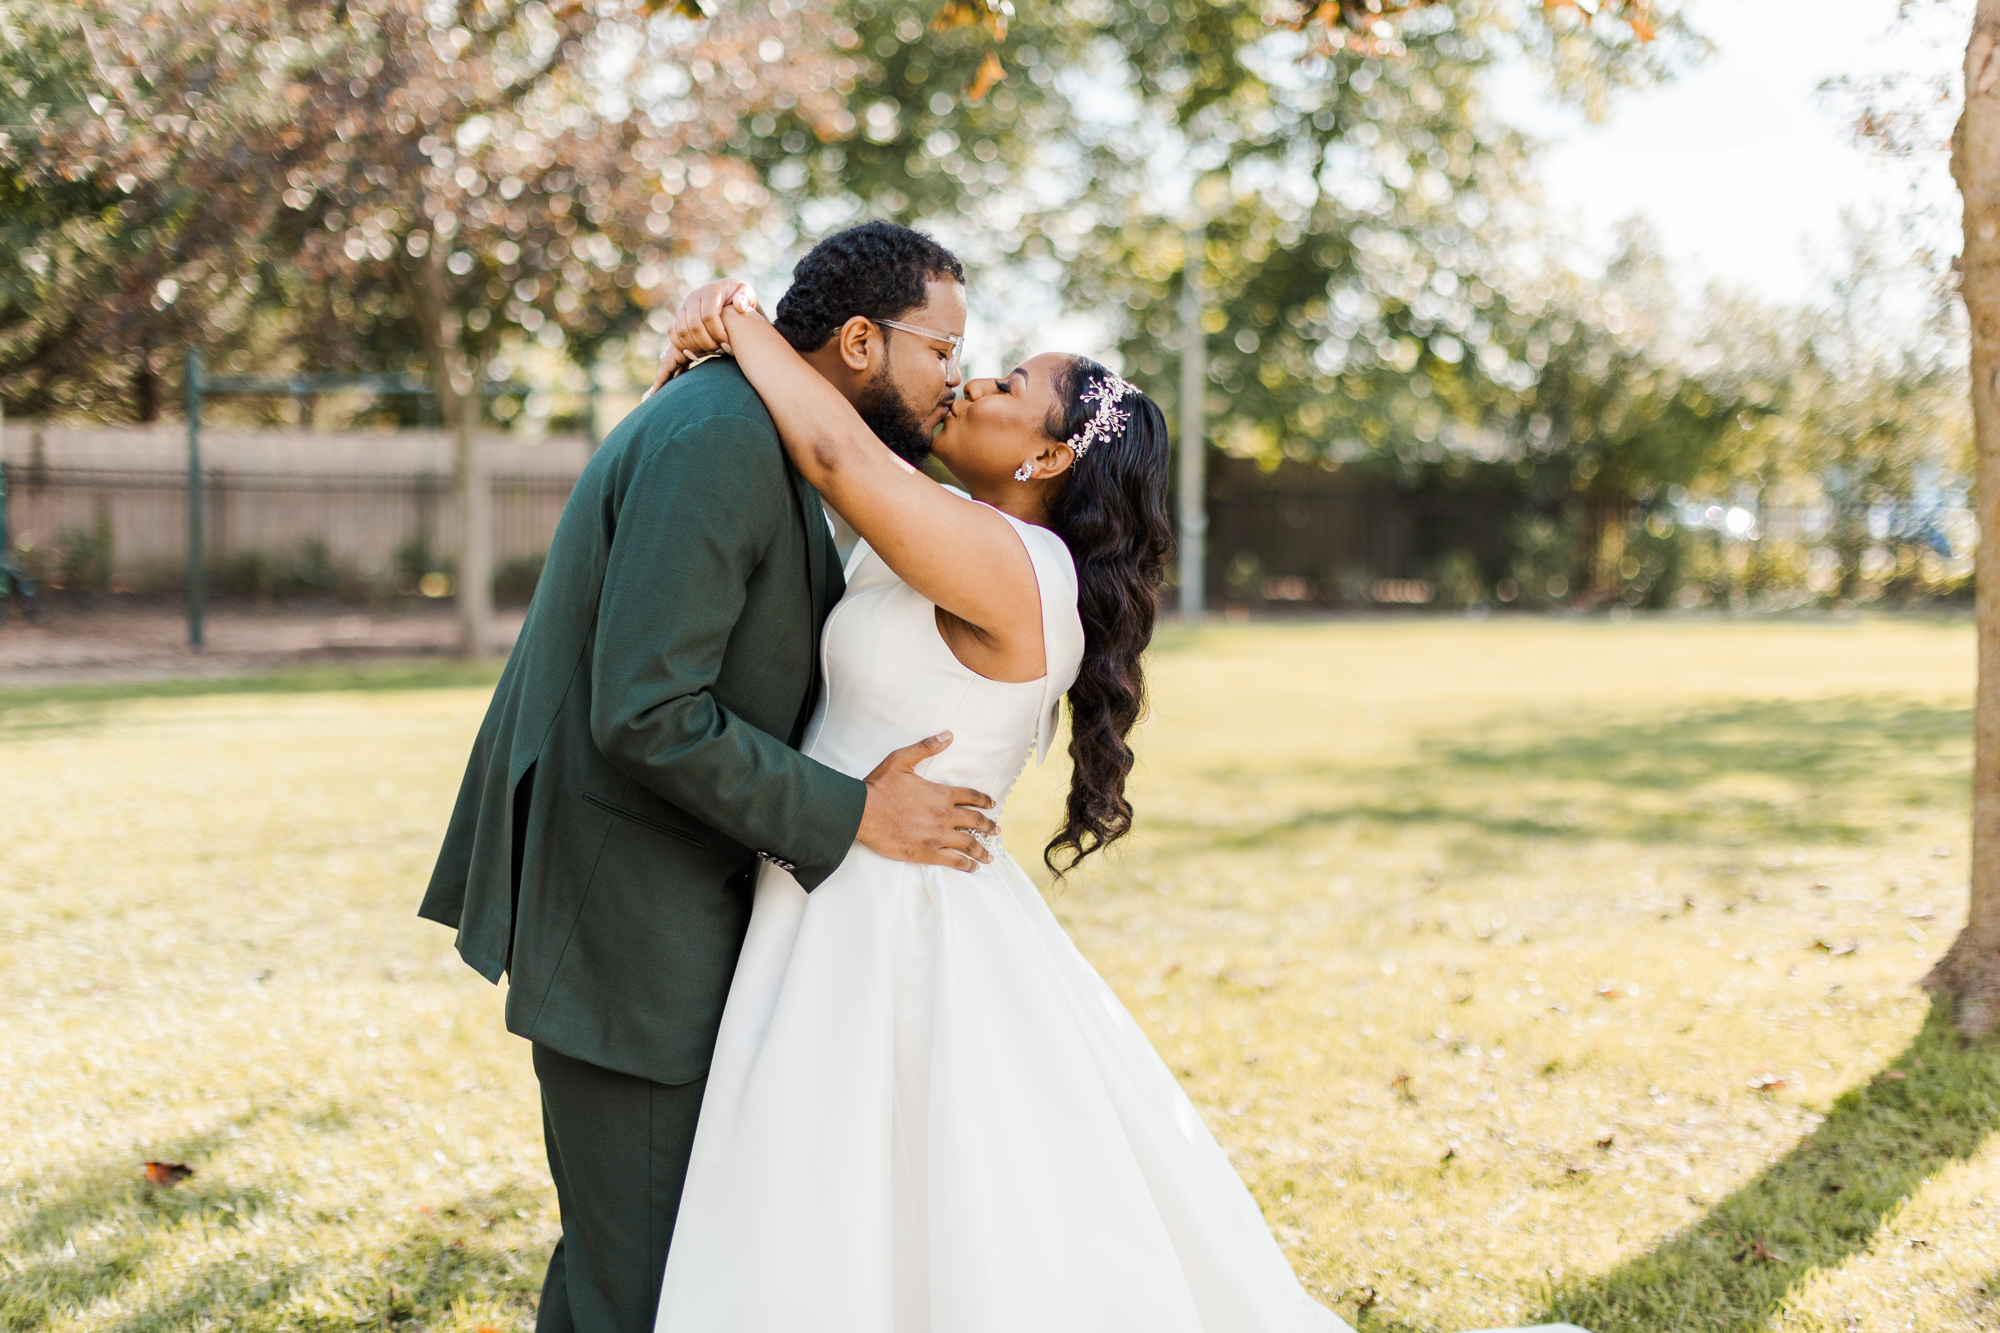 Charming New Jersey Wedding Photos at Edgewood Country Club in Fall